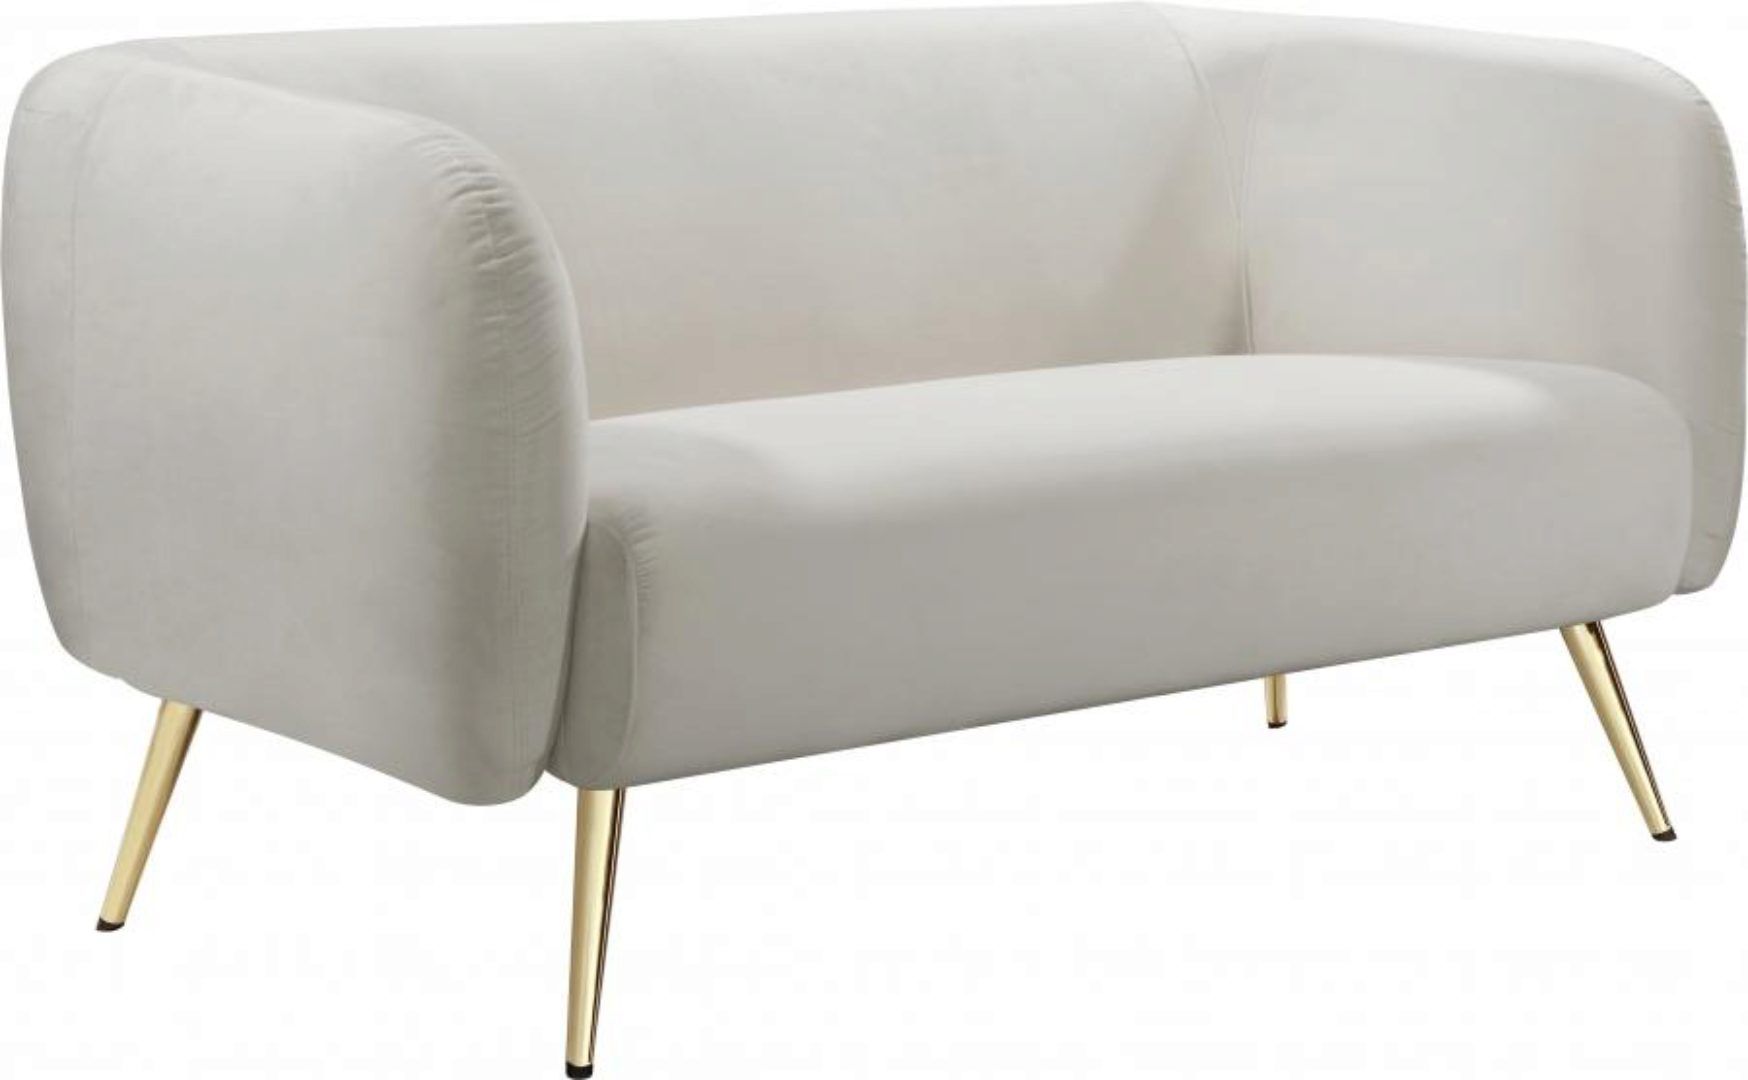 Cream Velvet Gold Metal Legs Sofa & Loveseat Set 2pcs Meridian Within Cream And Gold Console Tables (View 3 of 20)